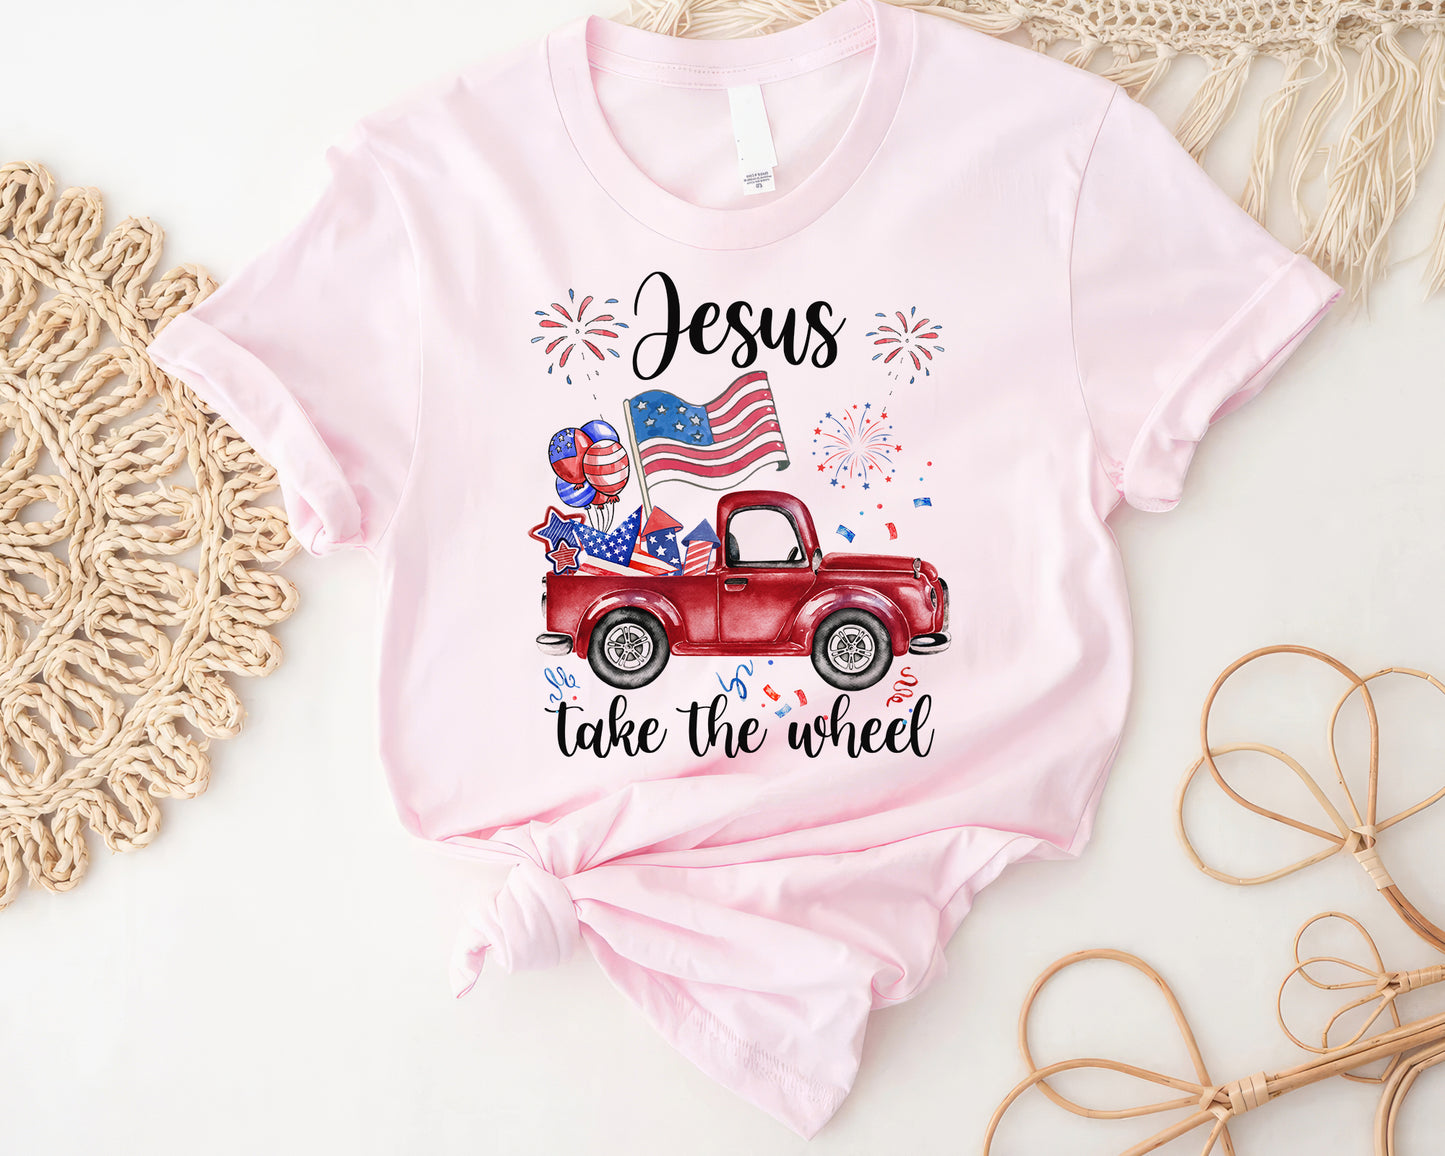 Tee Art Online - Fourth of July Jesus Take The Wheel Vintage Truck Firework Tee | Veteran Day -Memorial Day - US Independence Day Patriot Day Retro Design - pink